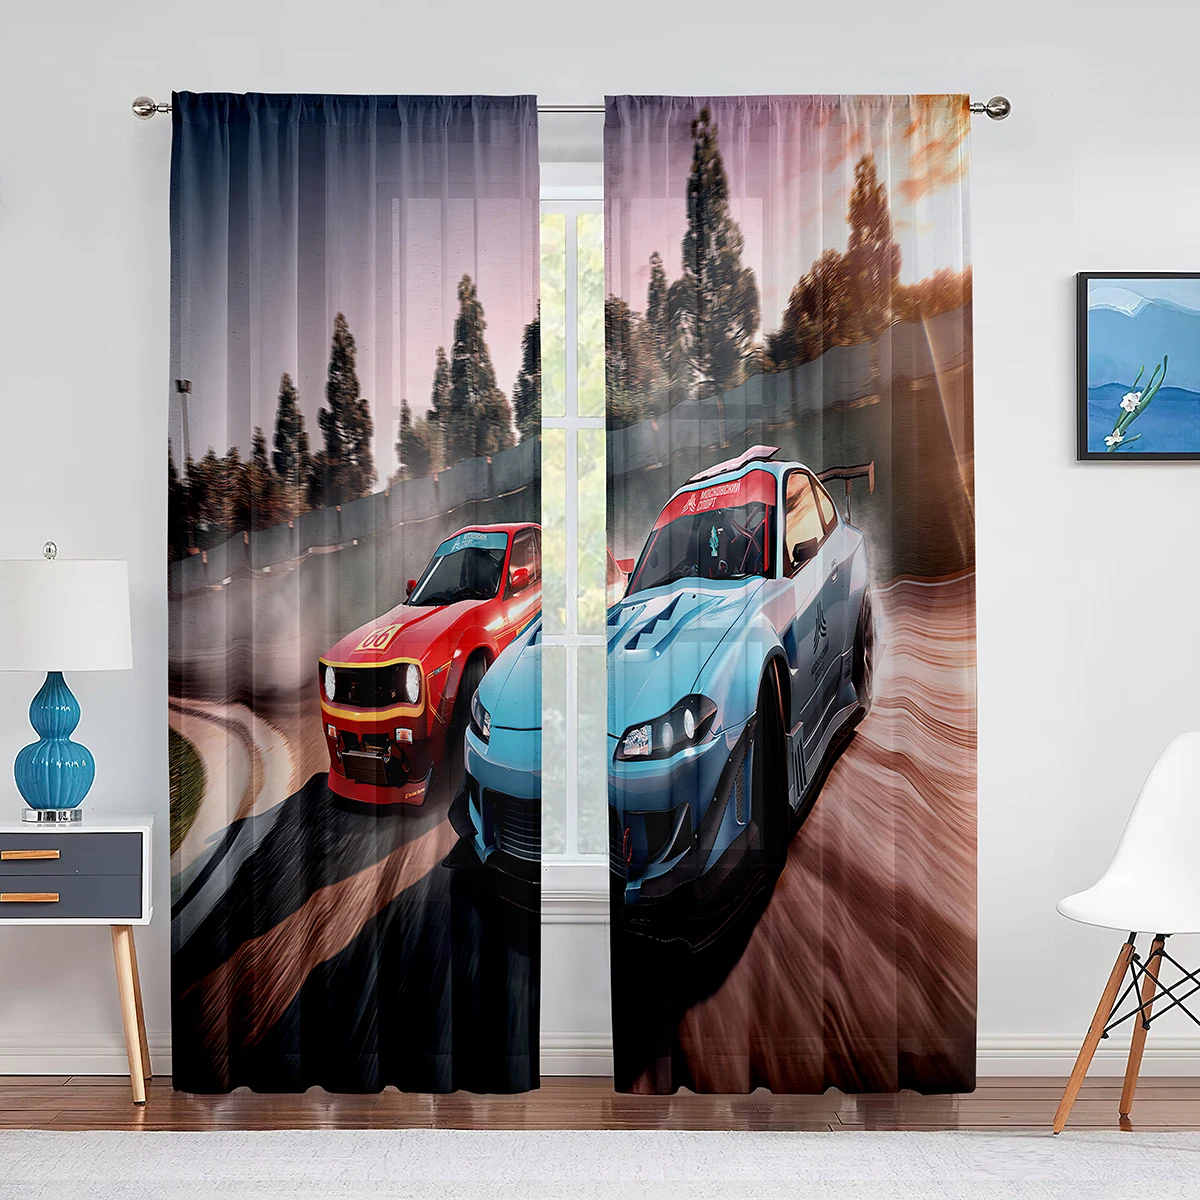 Race Car Sheer Voile Curtain Racing Car Speed Extreme Sport Window Tulle Curtains for Living Room Bedroom Teens Mens Room Decor